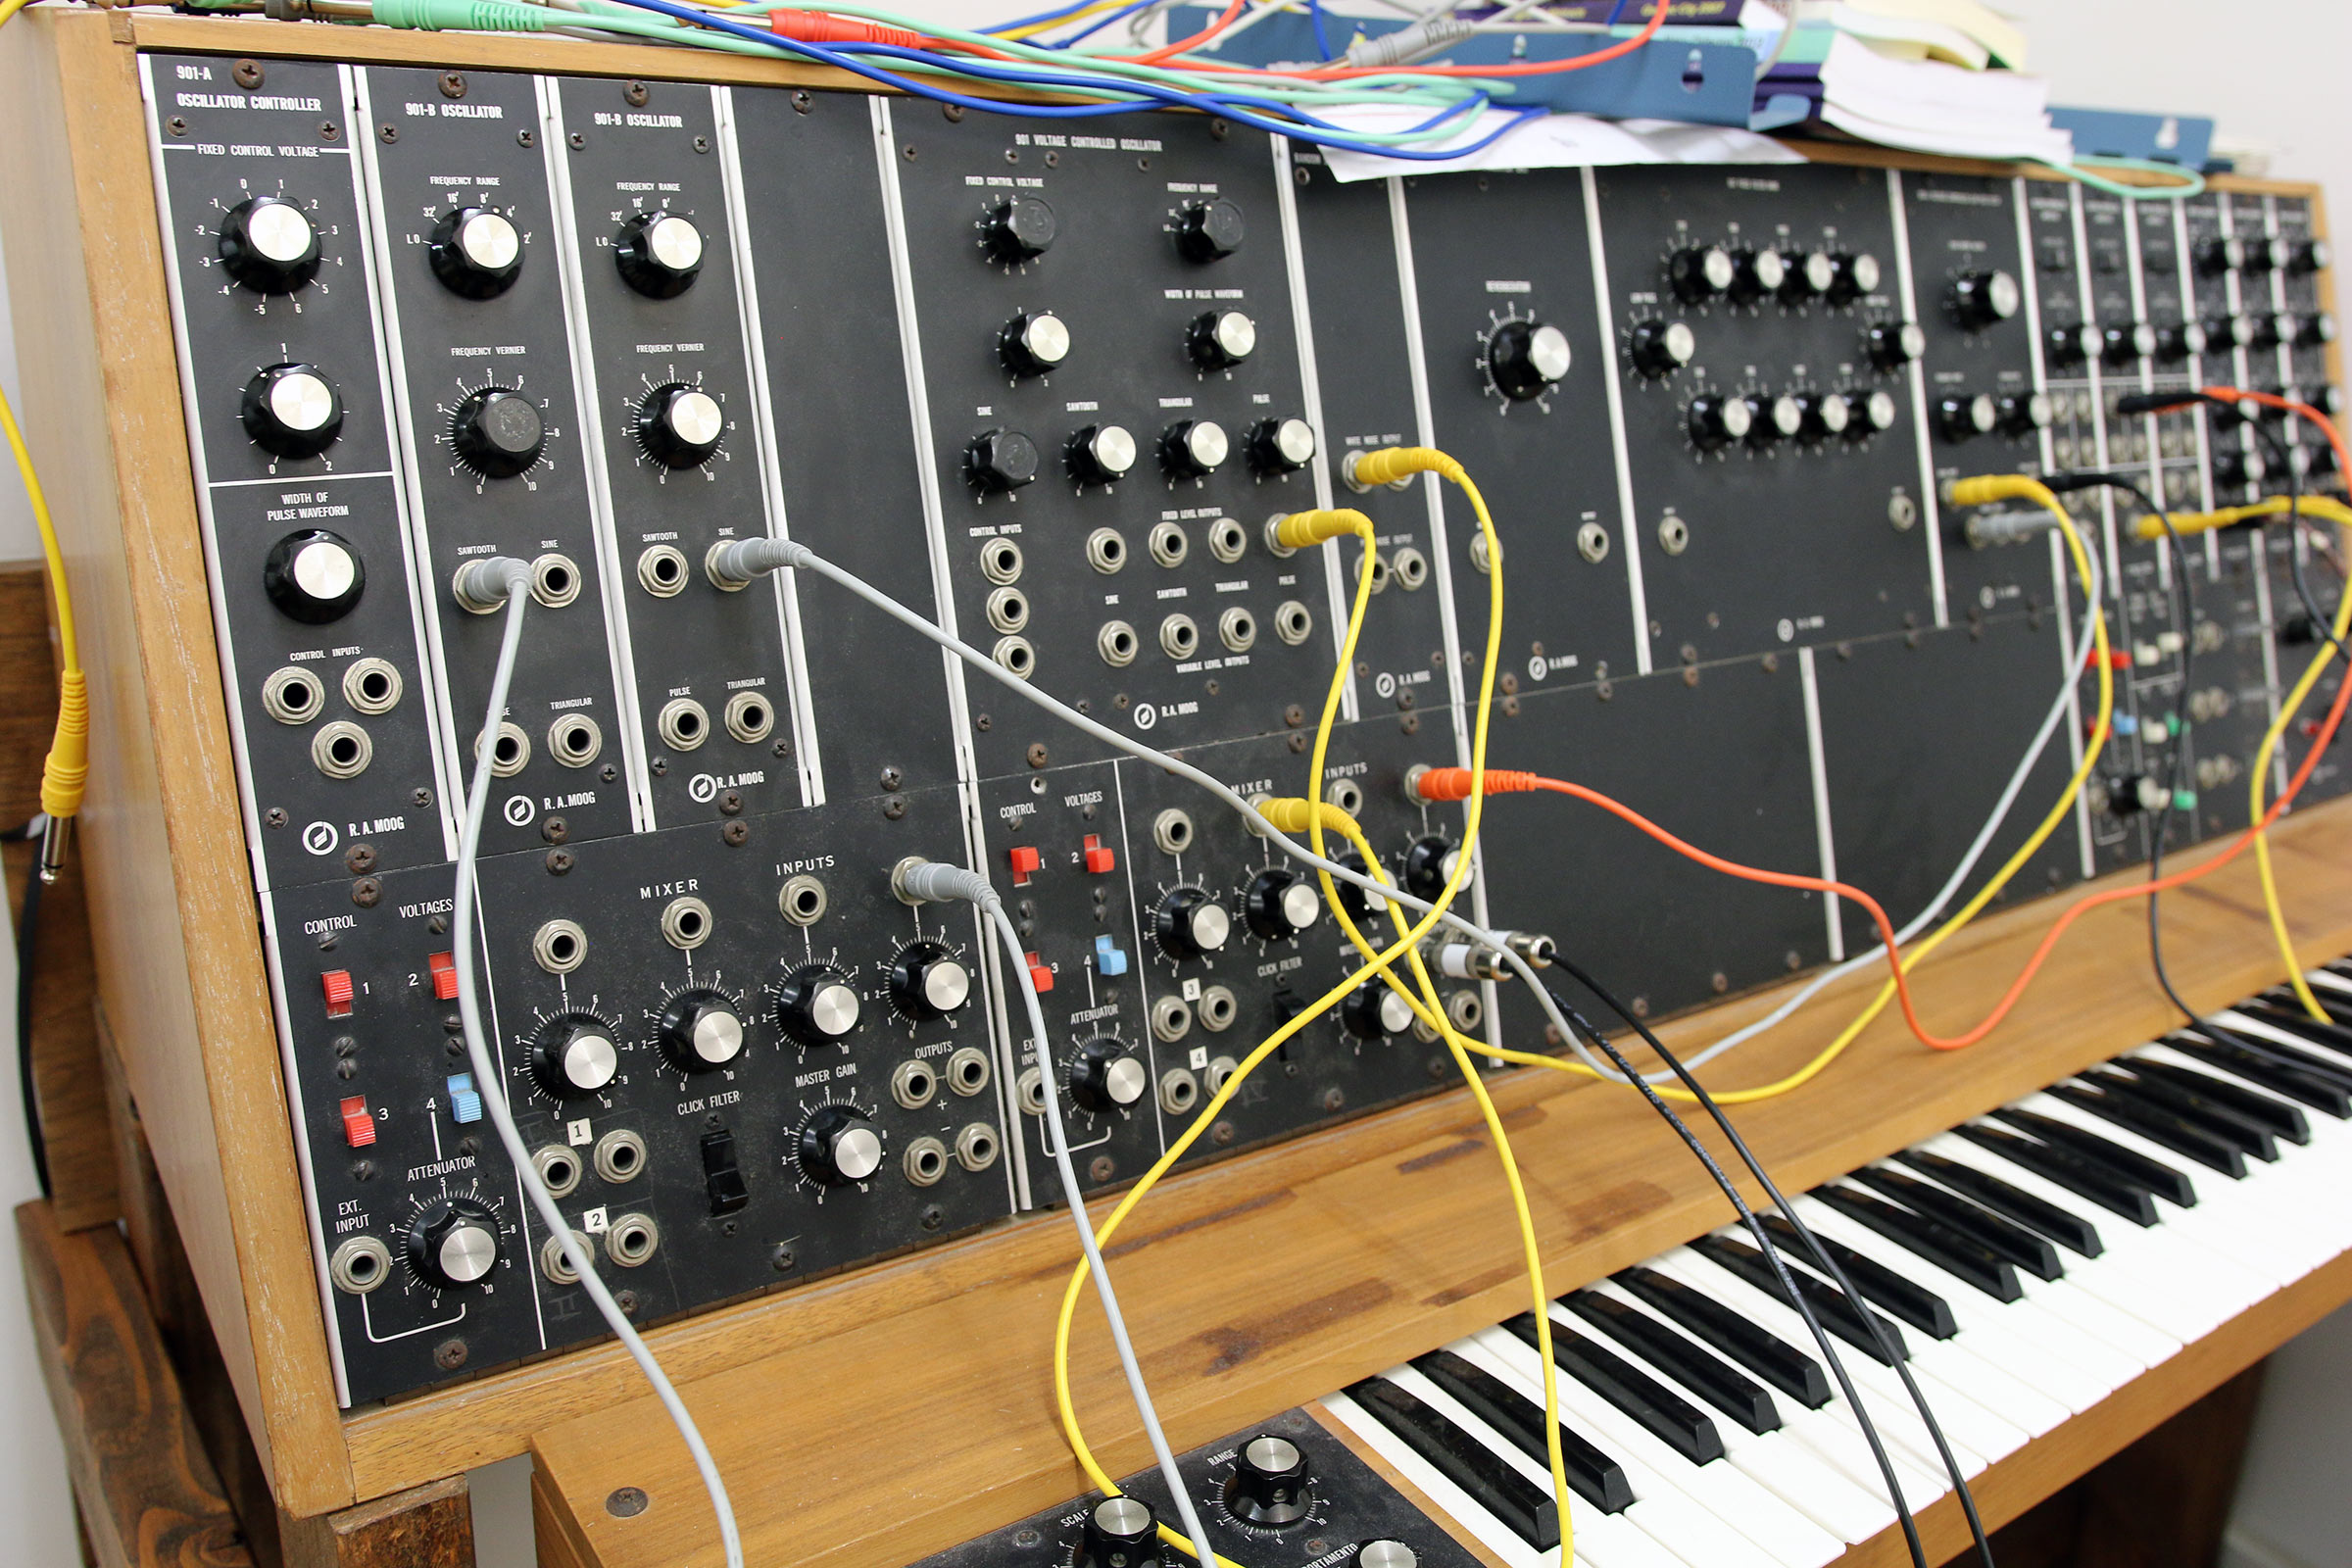 A vintage patch cord analog synthesizer at Daria Semegen's electronic music studio at Stony Brook University.